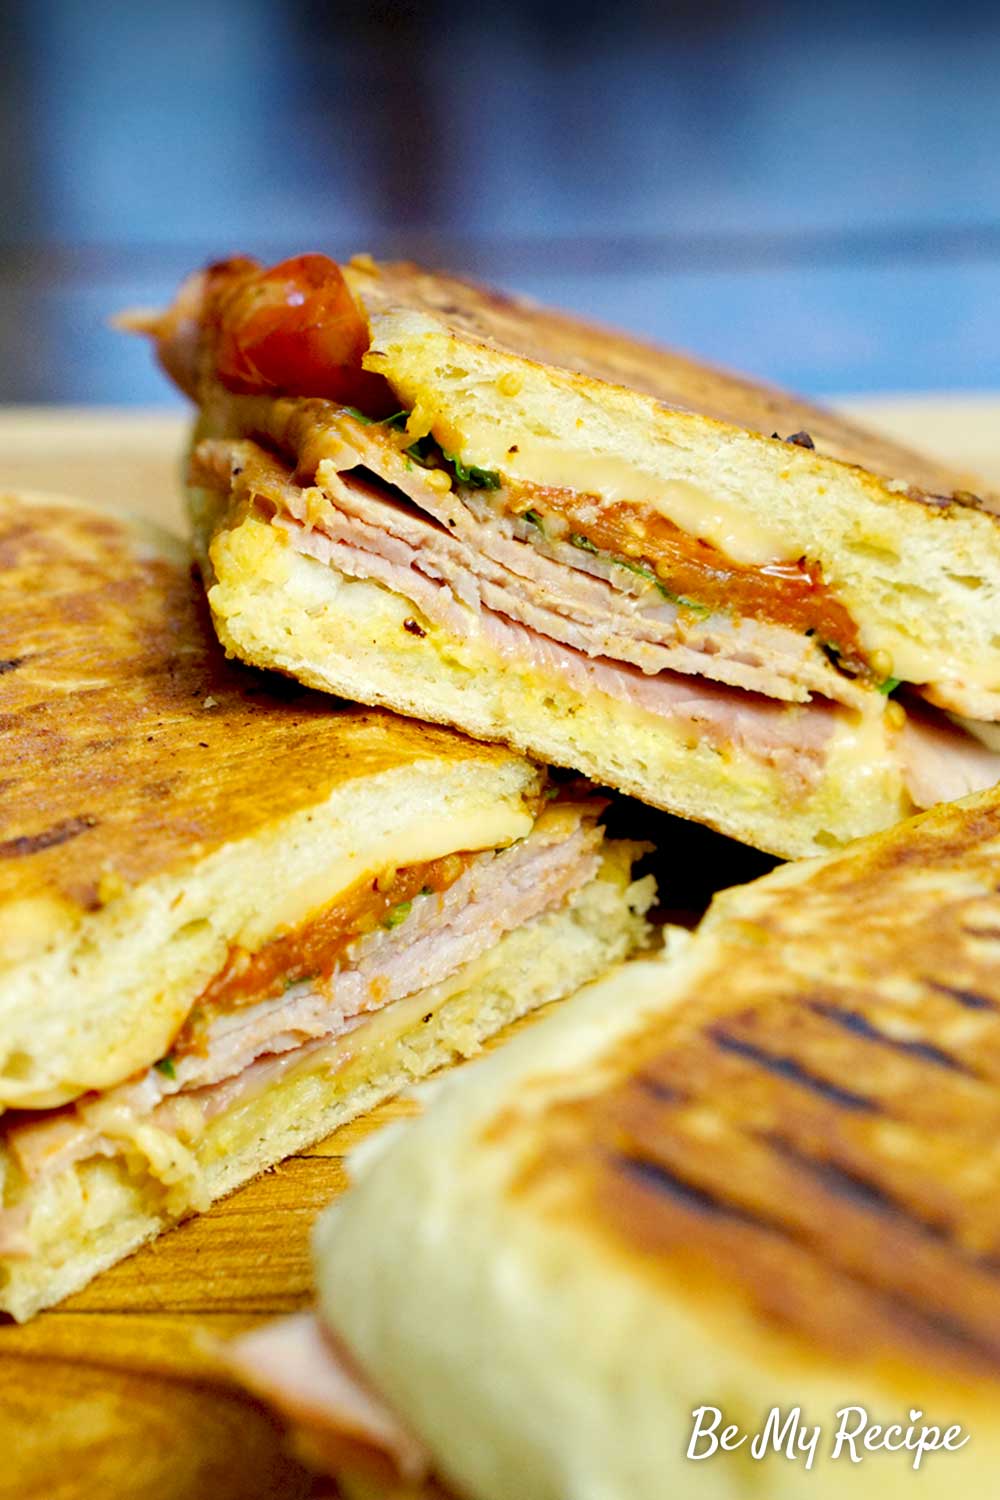 Classic Ham and Cheese Panini Recipe for a Sumptuous Lunch